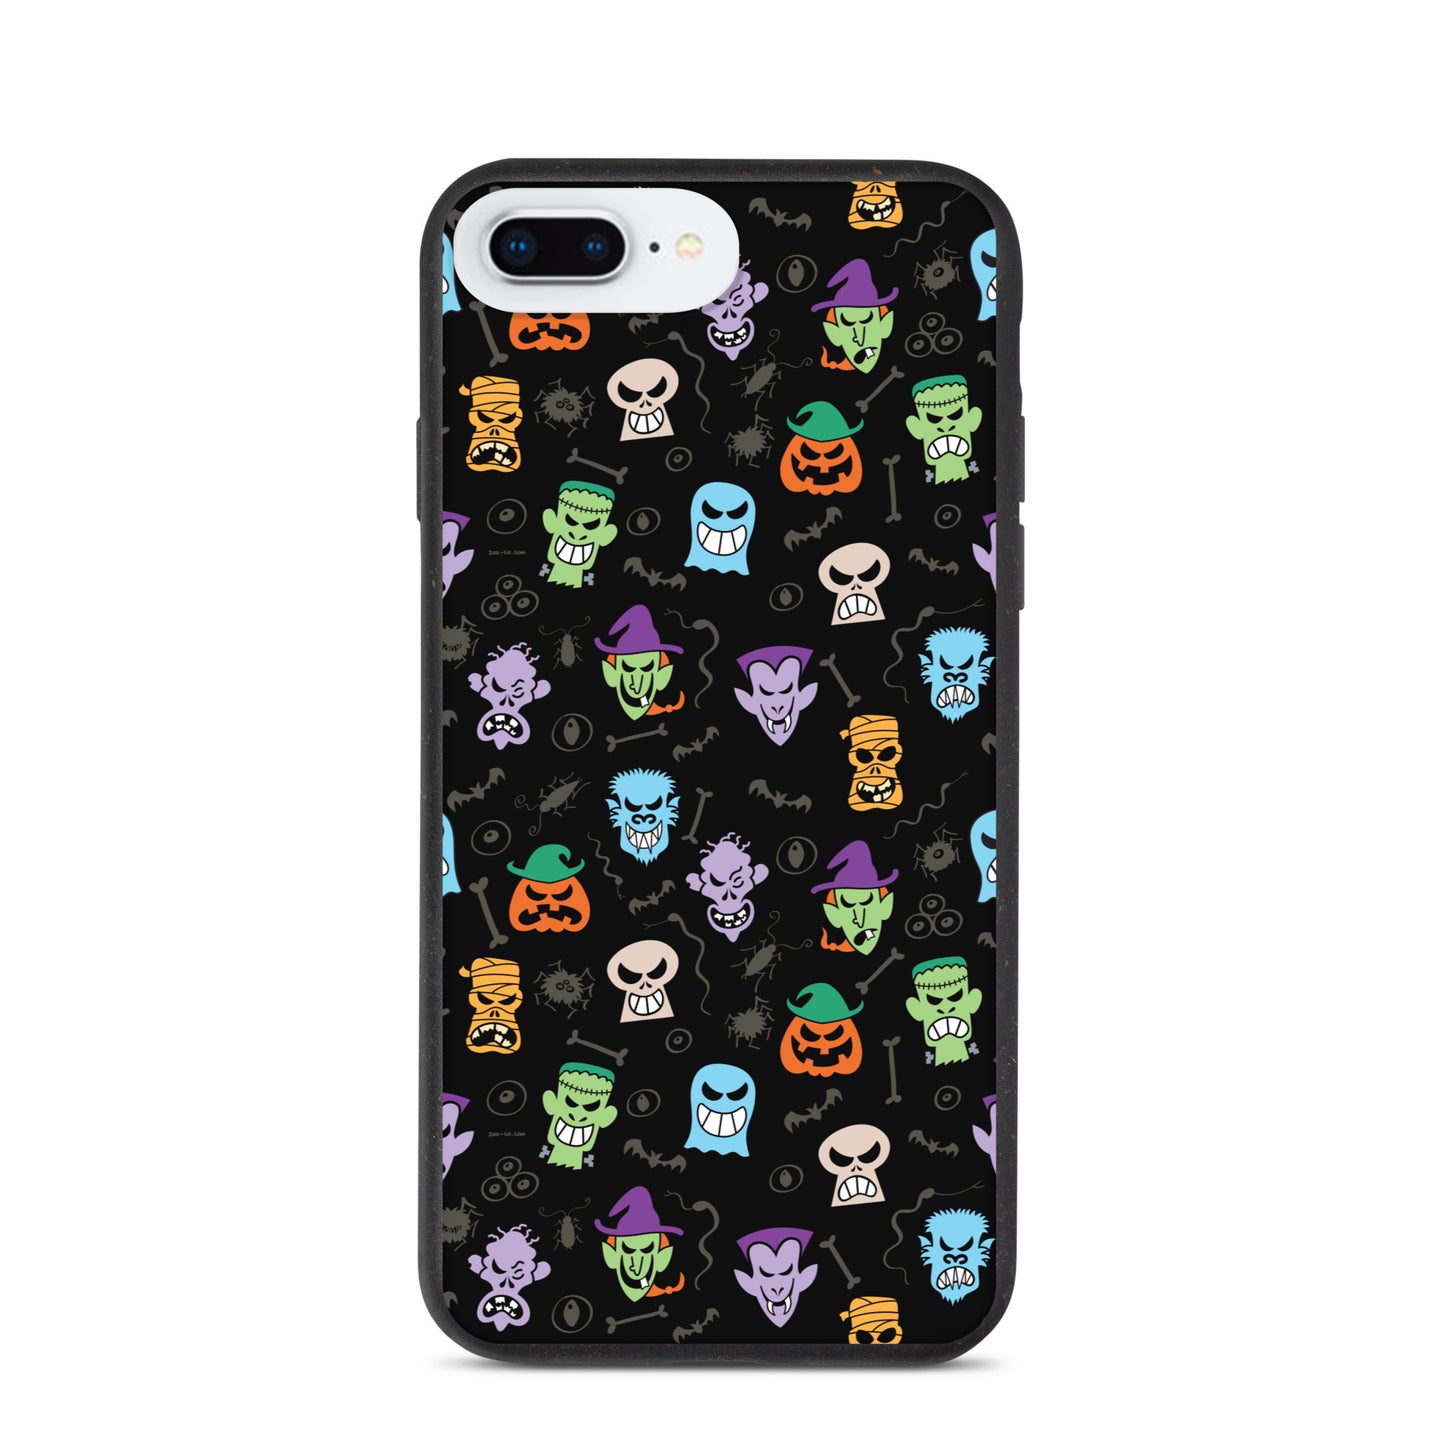 Scary Halloween faces Speckled iPhone case. iPhone 7 plus, 8 plus